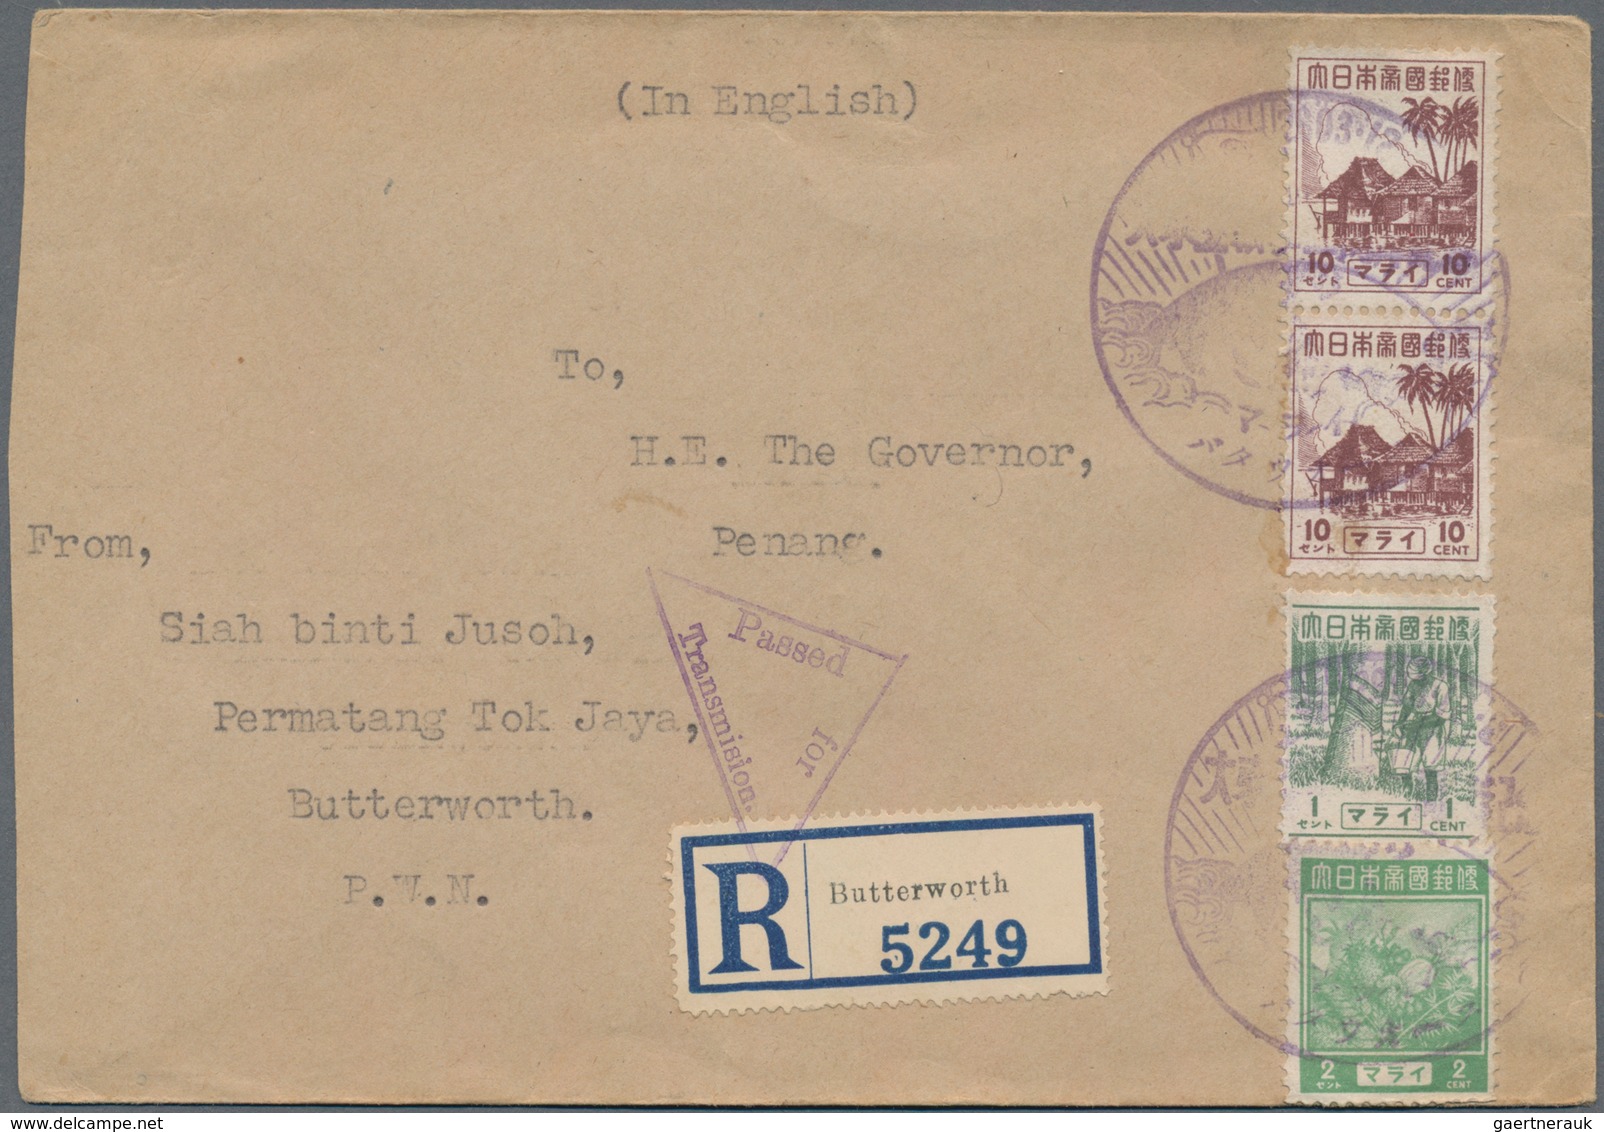 Japanische Besetzung  WK II - Malaya: Penang, 1943/44, covers and blanc envelopes/cards (8) with var